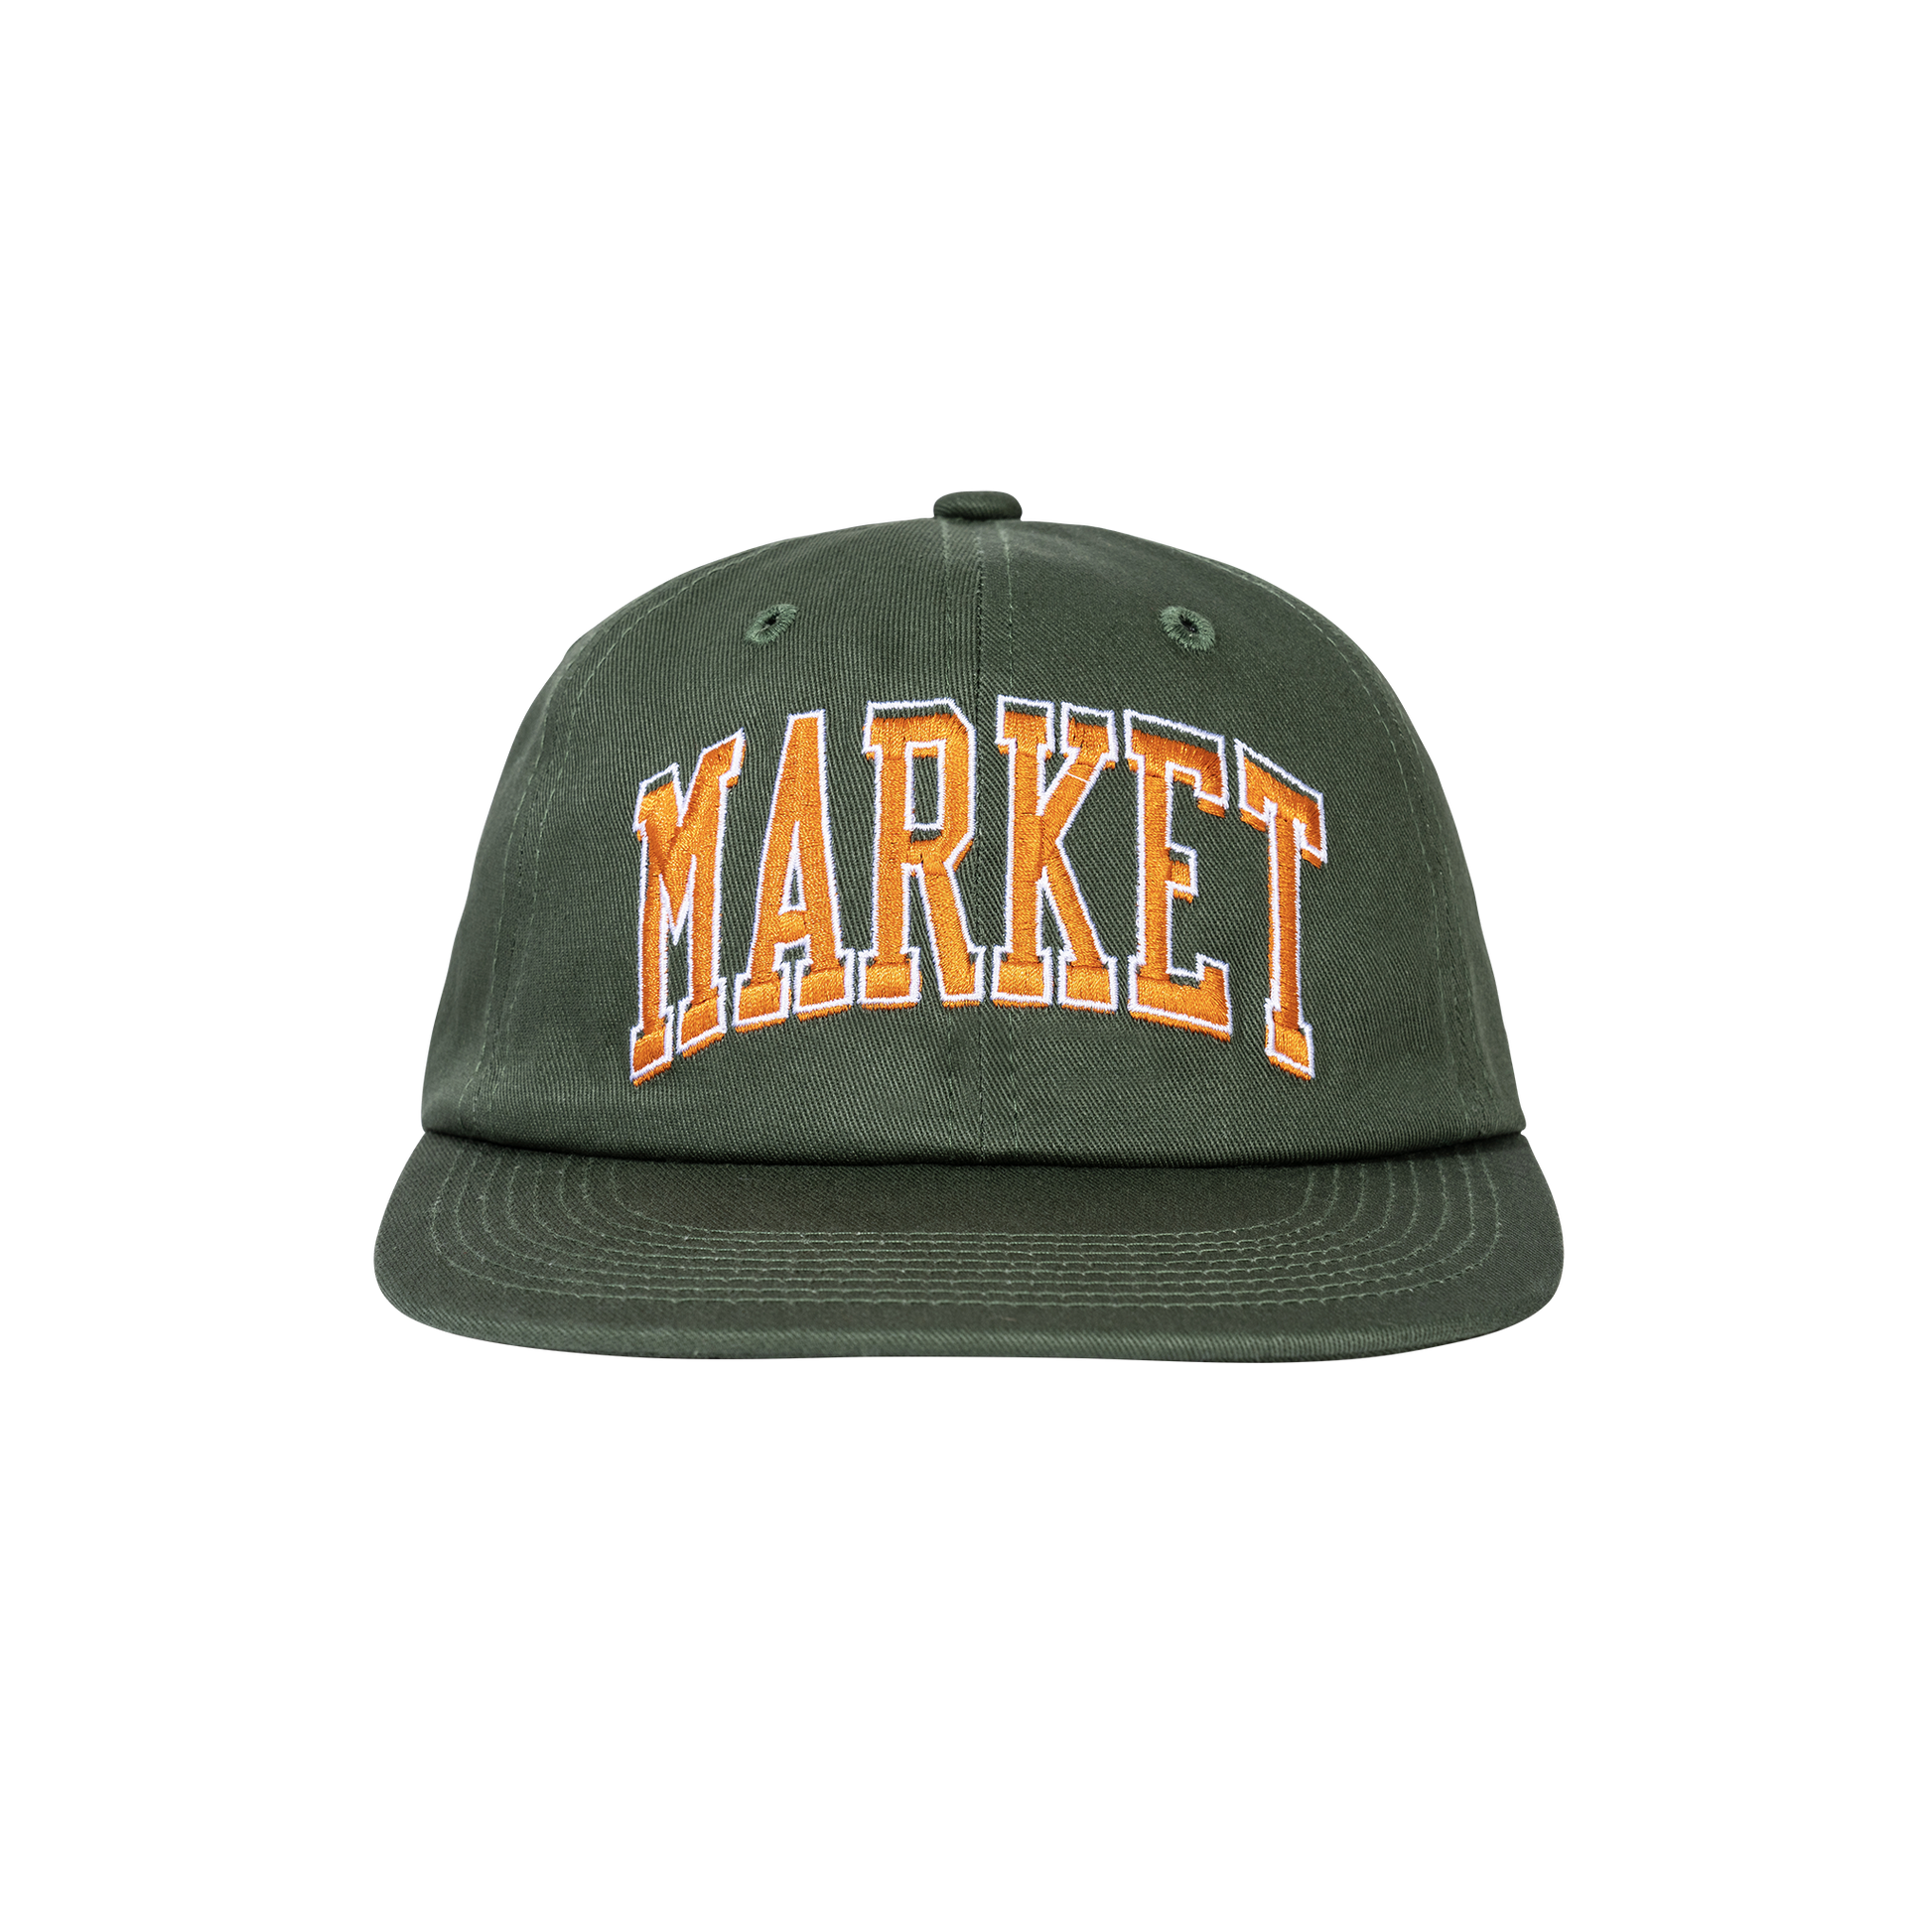 MARKET clothing brand OFFSET ARC 6 PANEL HAT. Find more graphic tees, hats, beanies, hoodies at MarketStudios.com. Formally Chinatown Market. 